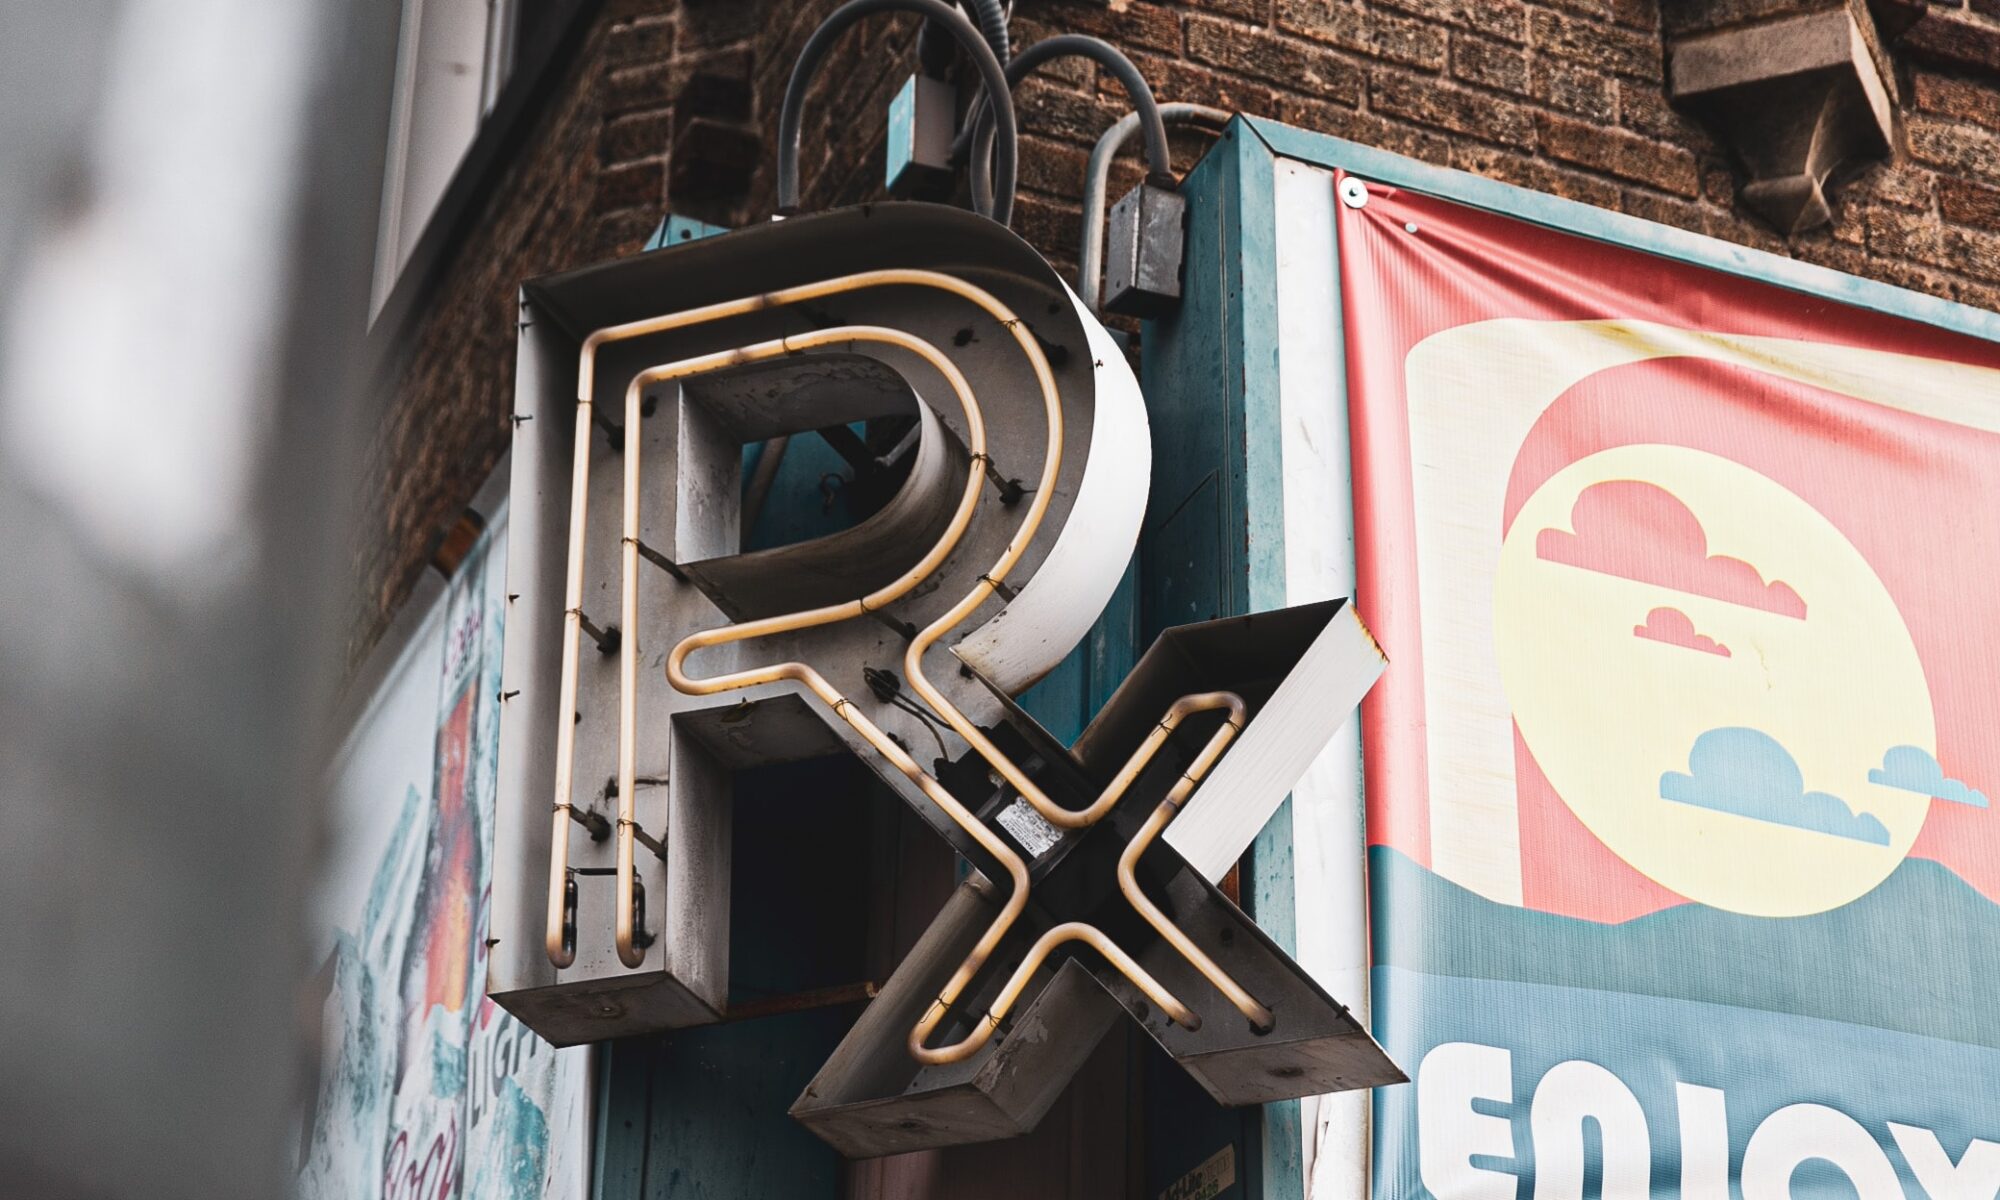 Rx sign on brick building